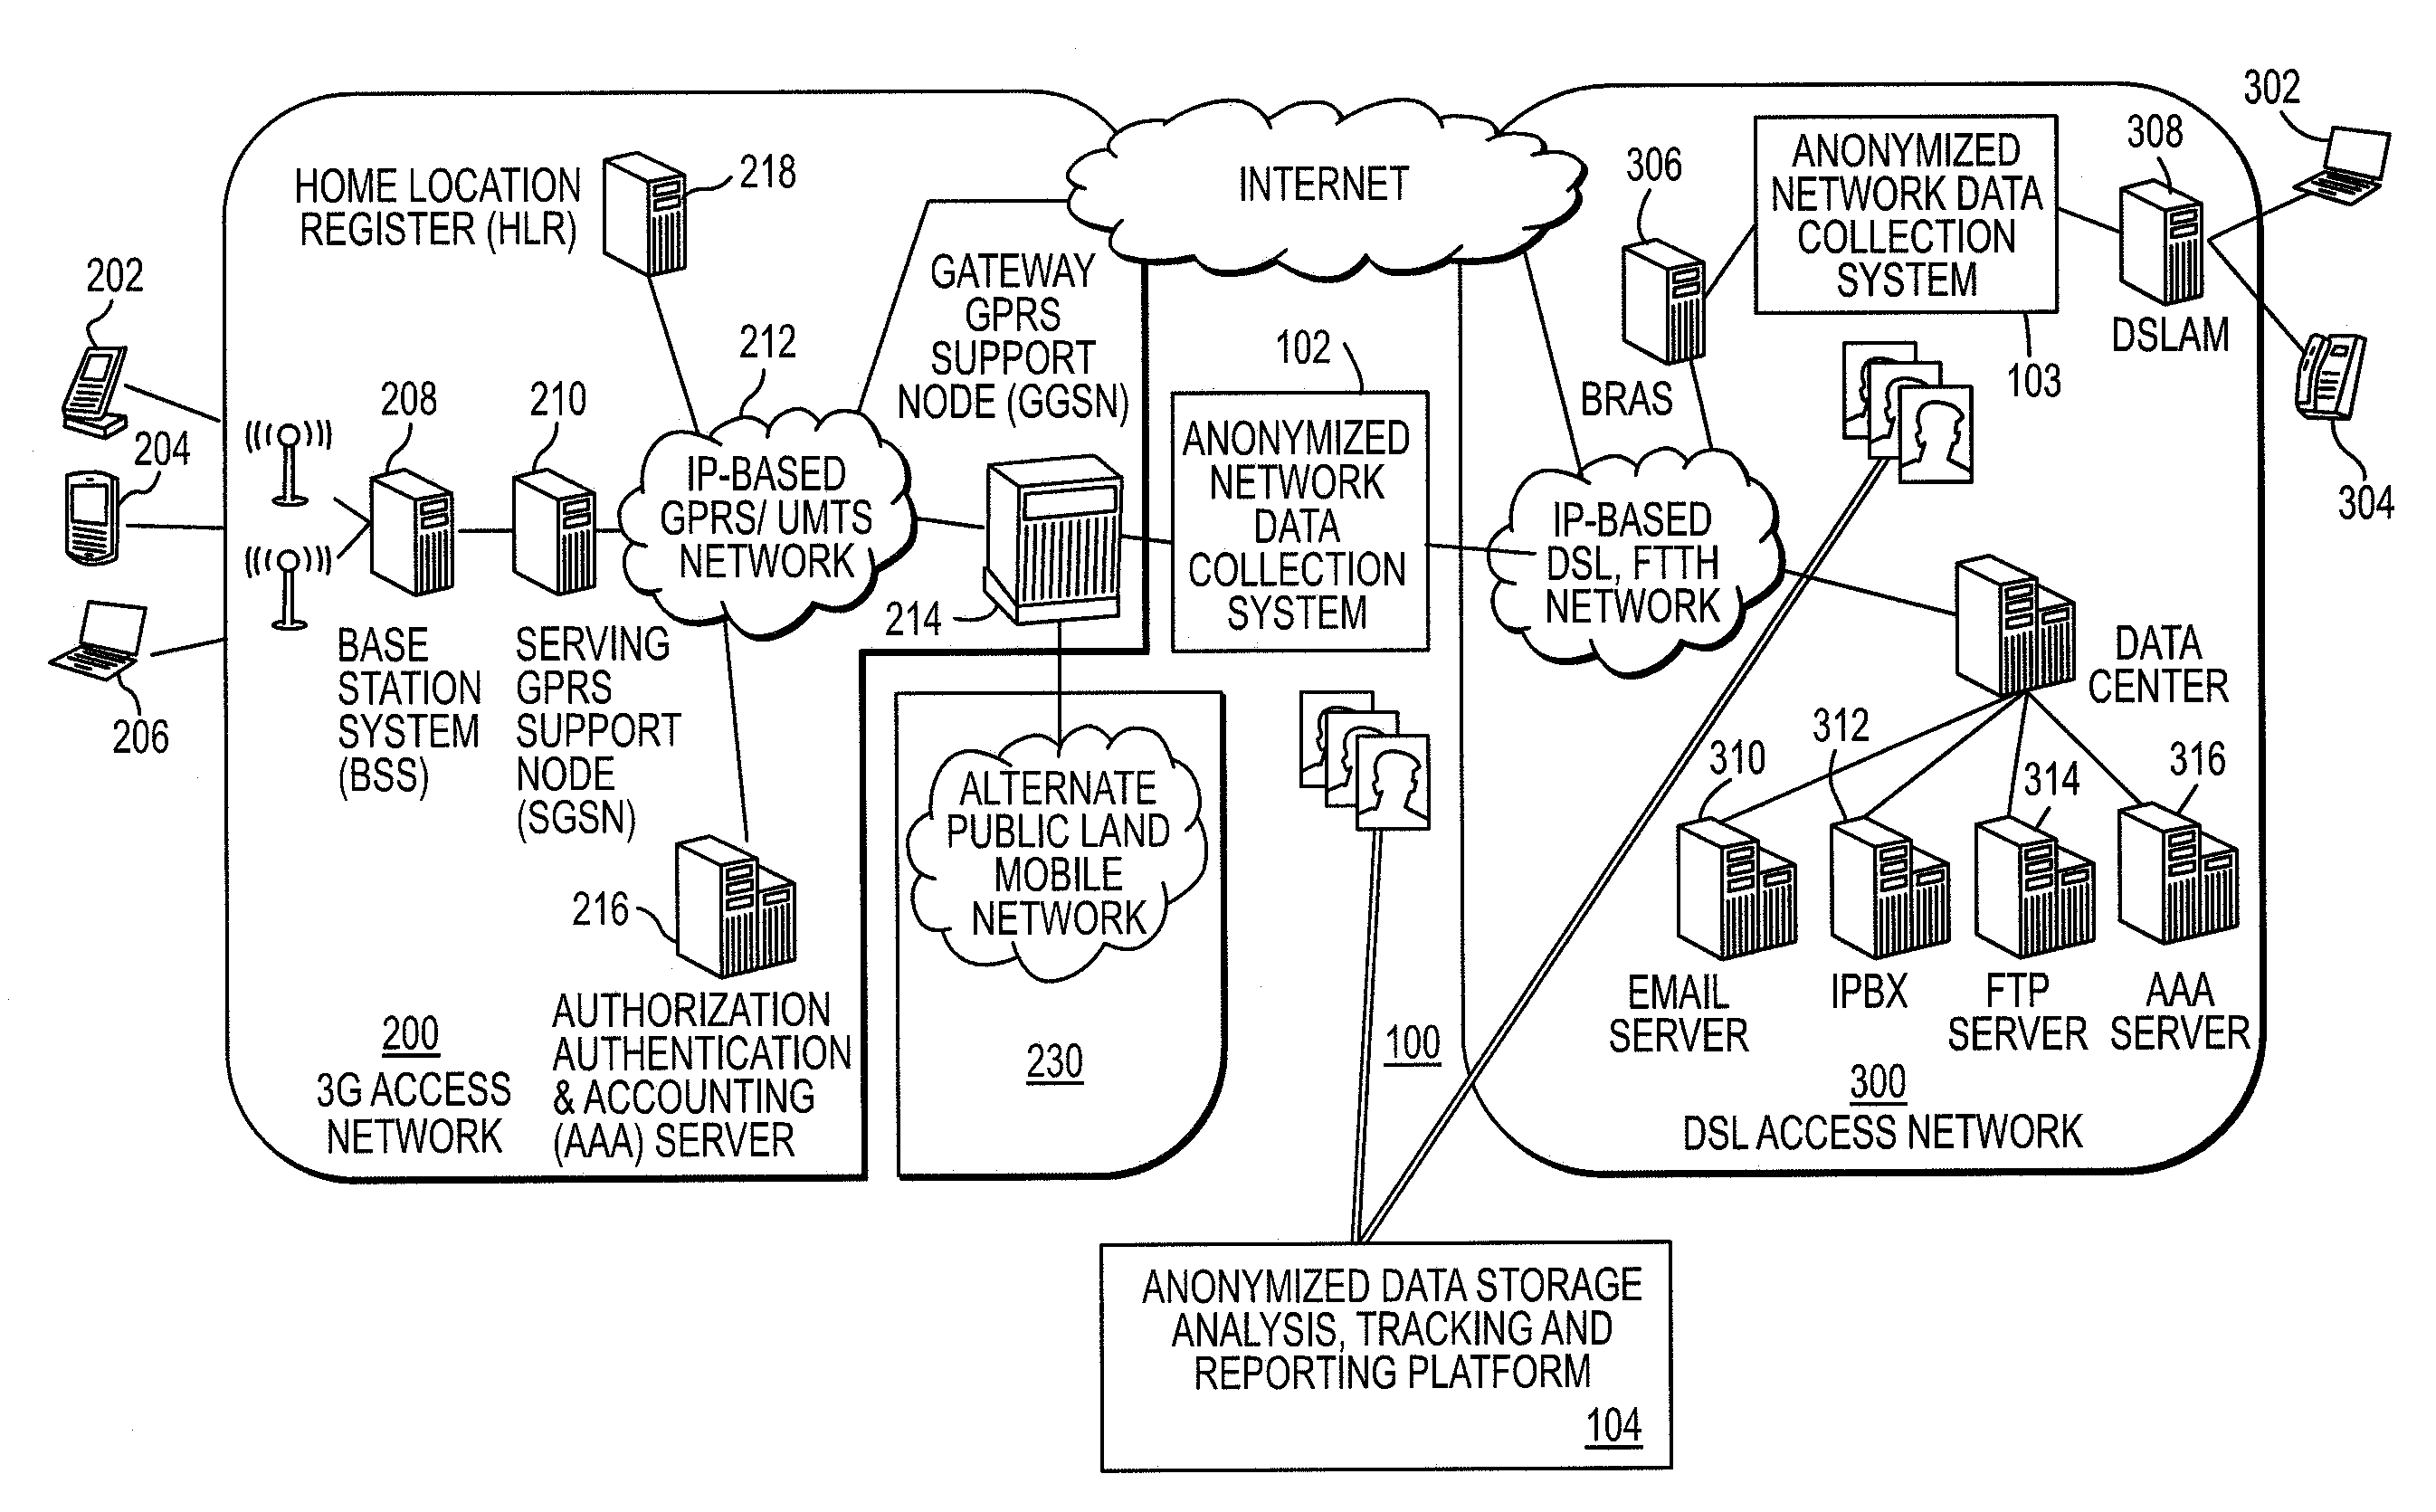 Network centric system and method to enable tracking of consumer behavior and activity